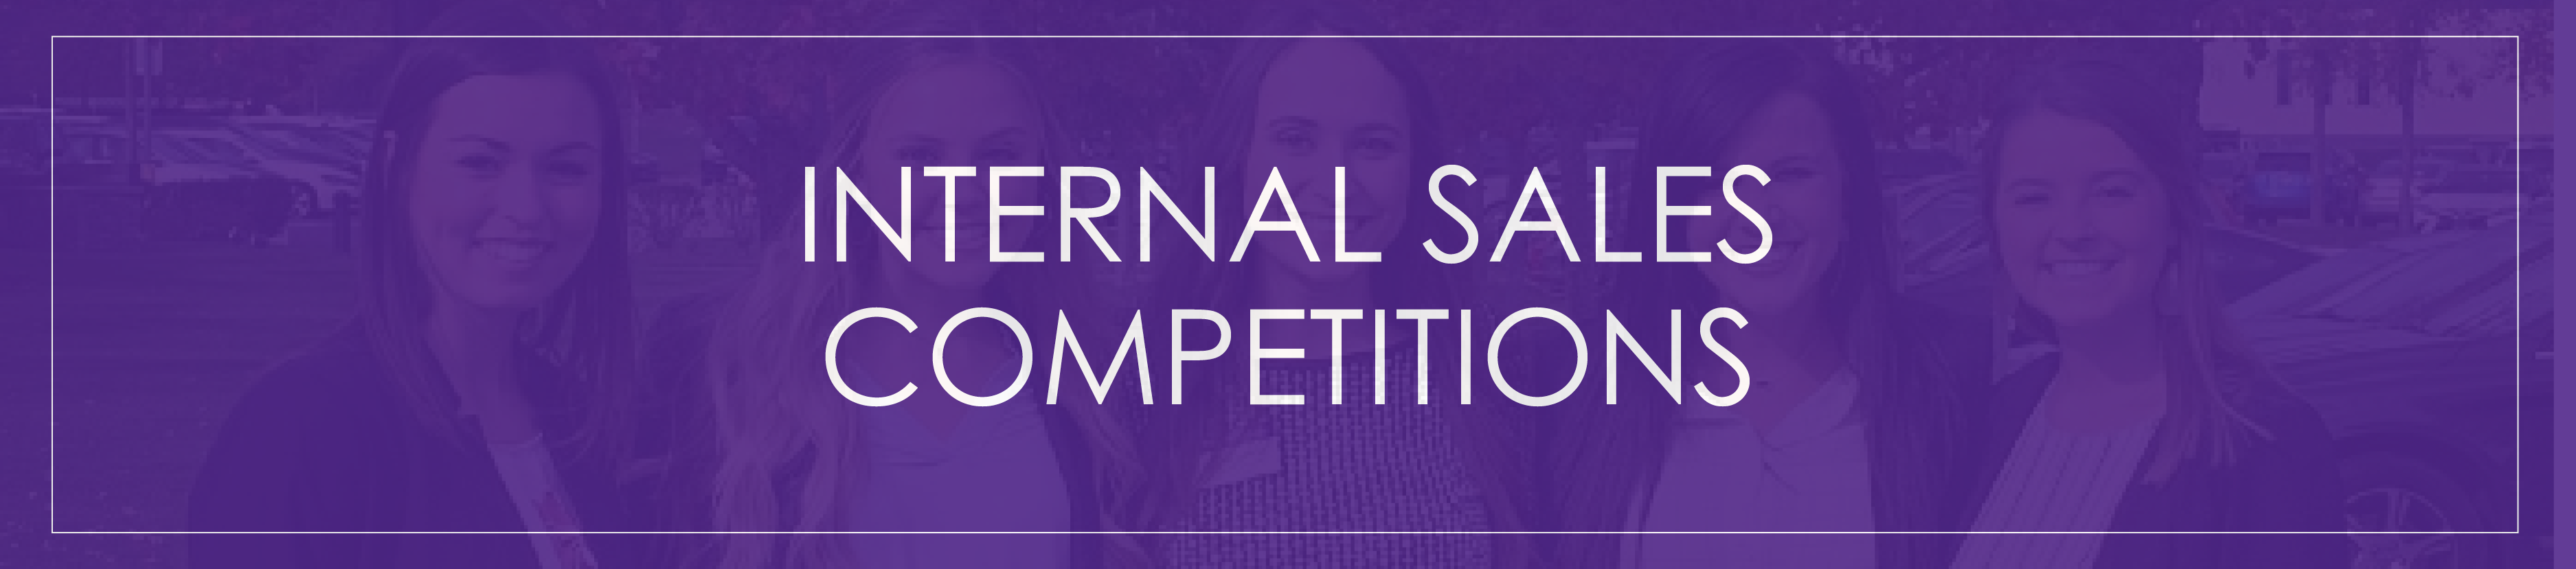 internal sales competitions